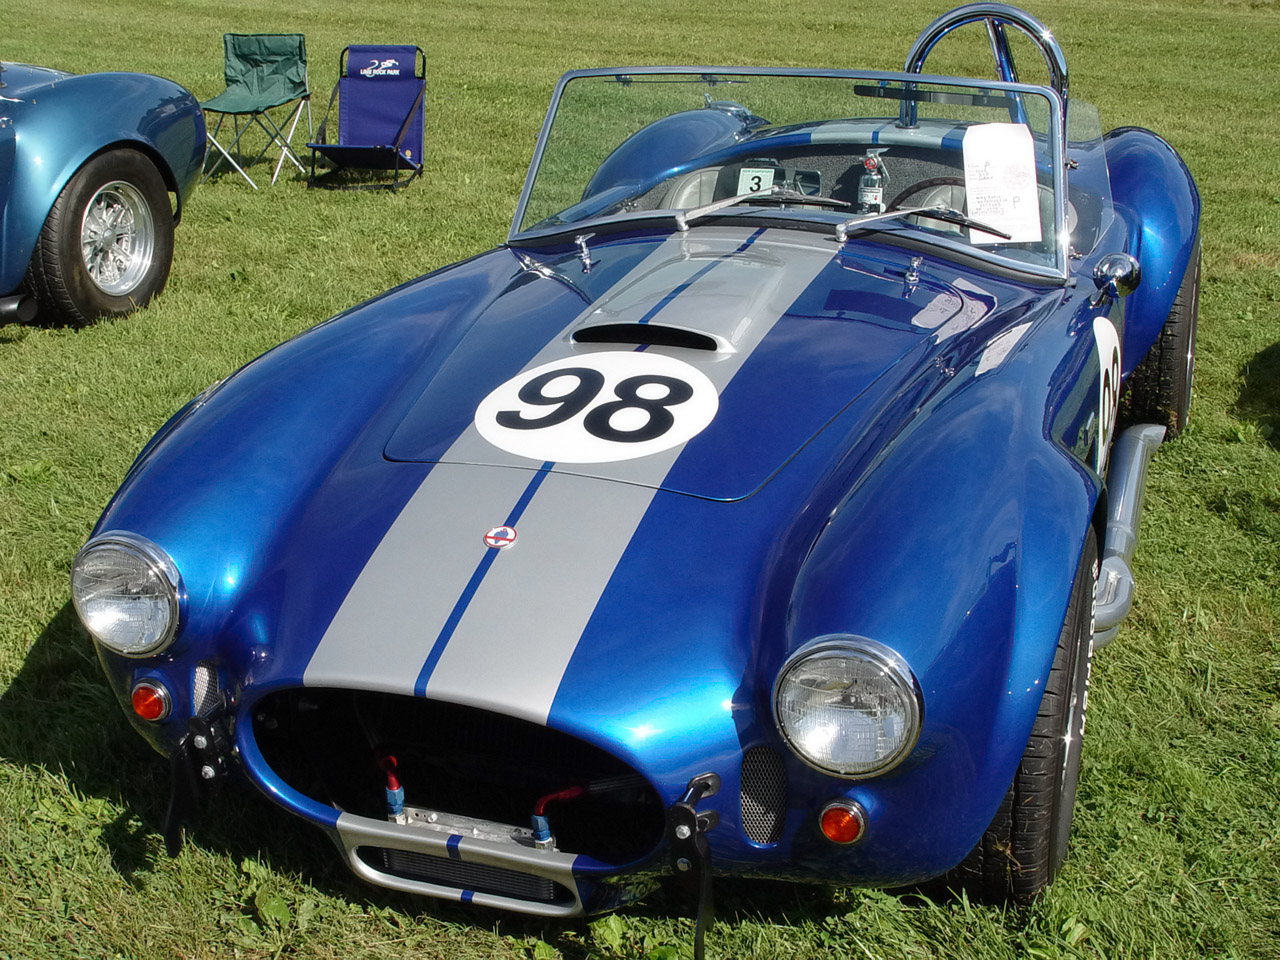 Shelby Cobra 427 - #98 - Blue - Front Angle - 1280x960 Wallpaper